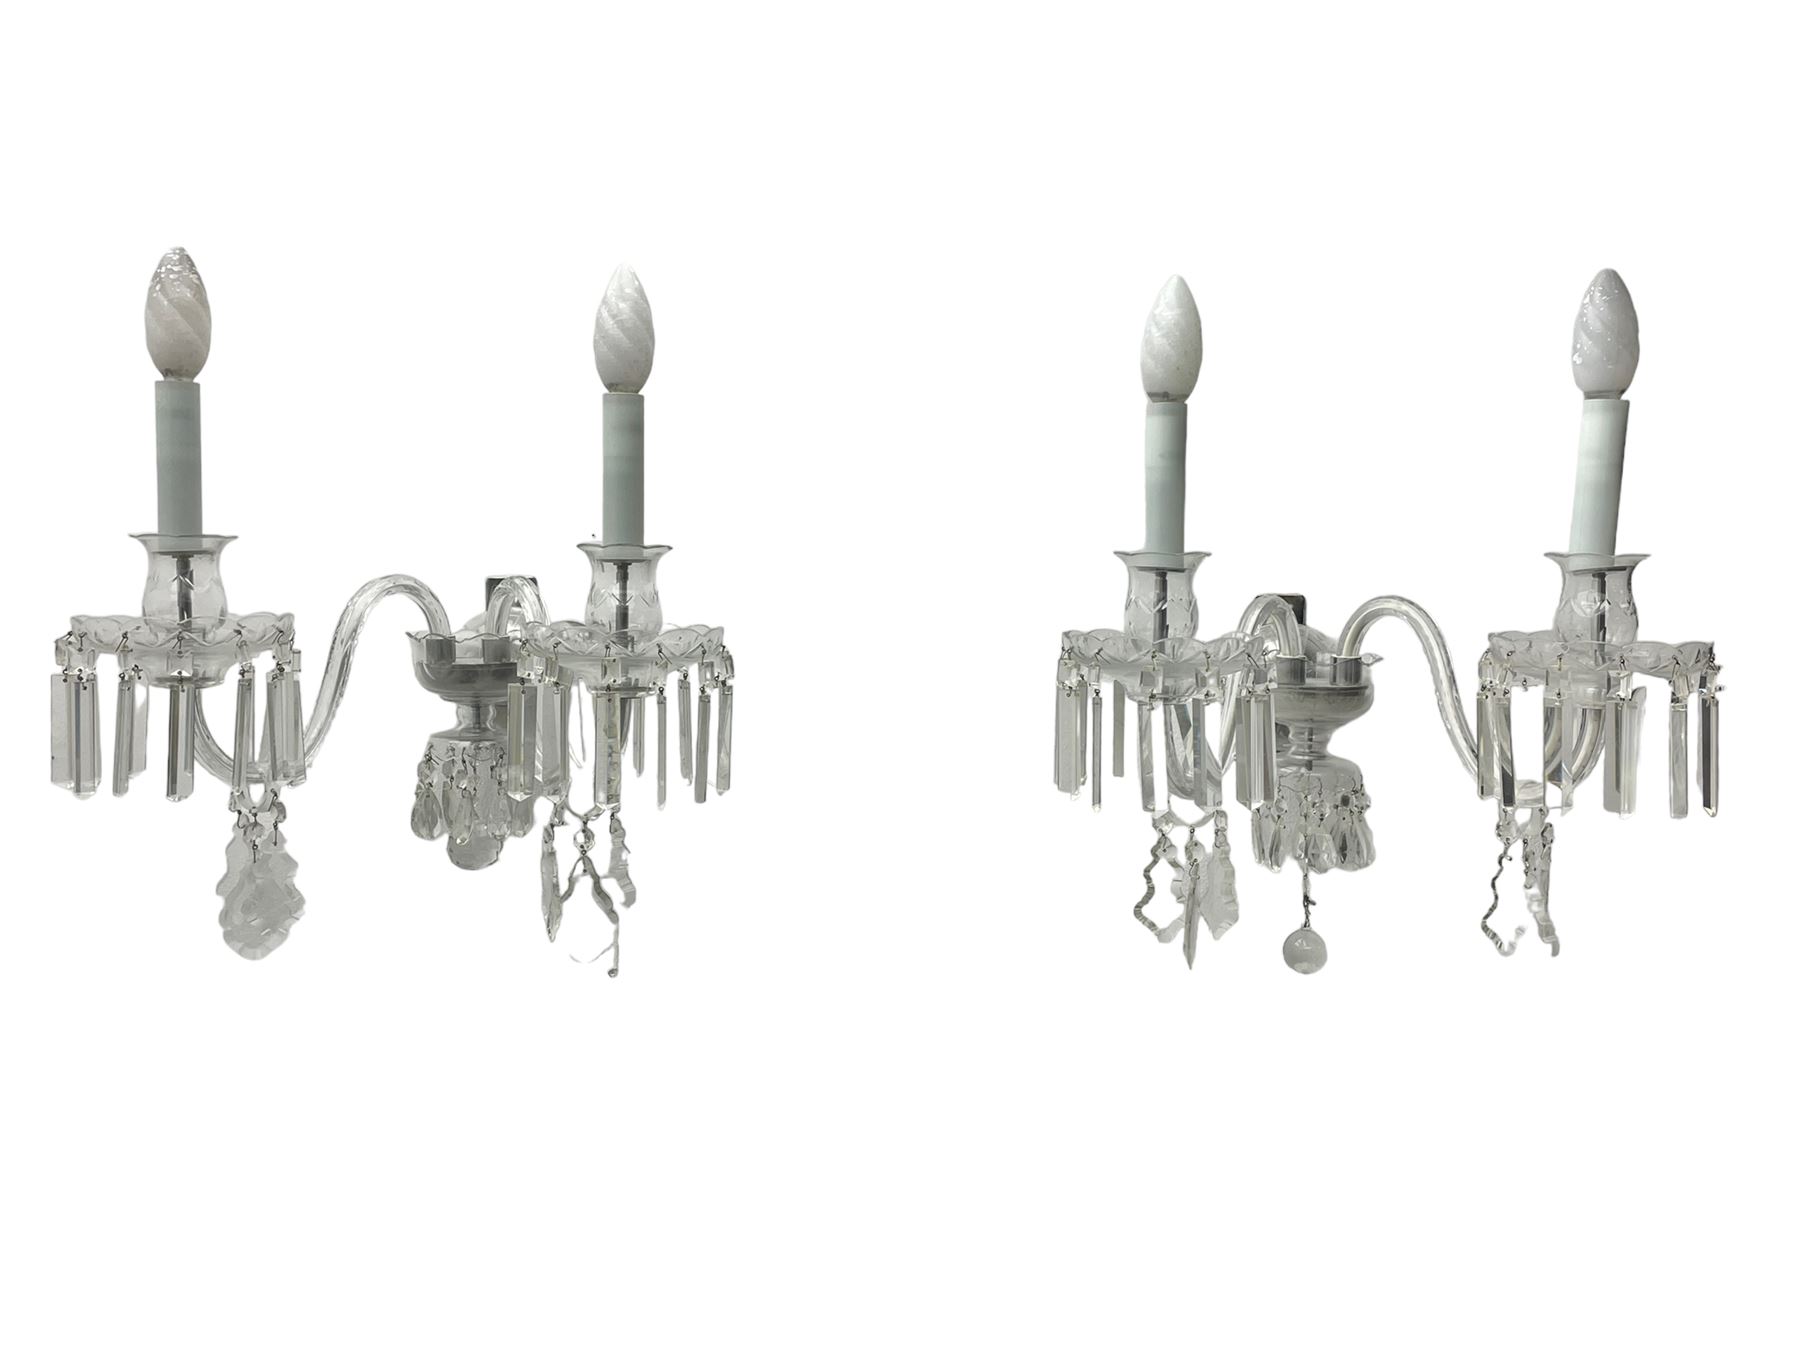 Pair of cut glass two branch wall sconce candelabras - Image 5 of 10